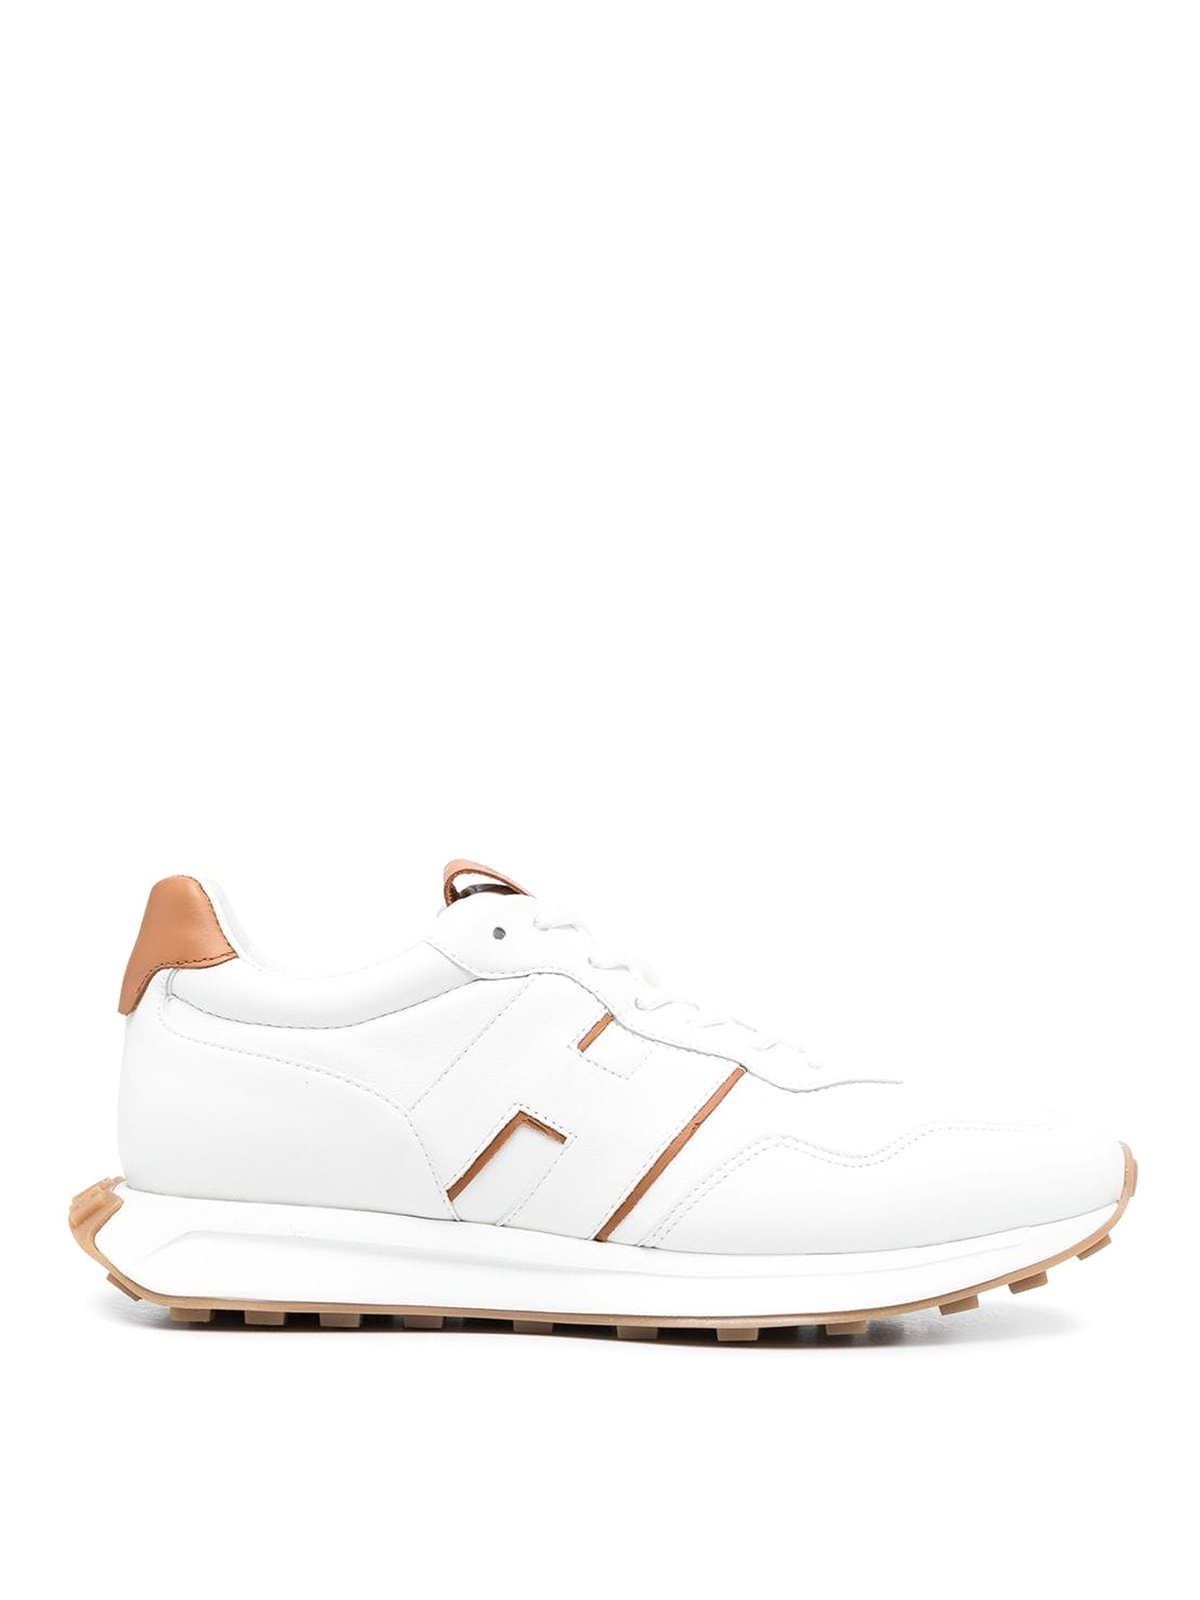 Hogan Trainers Leather In Blanco